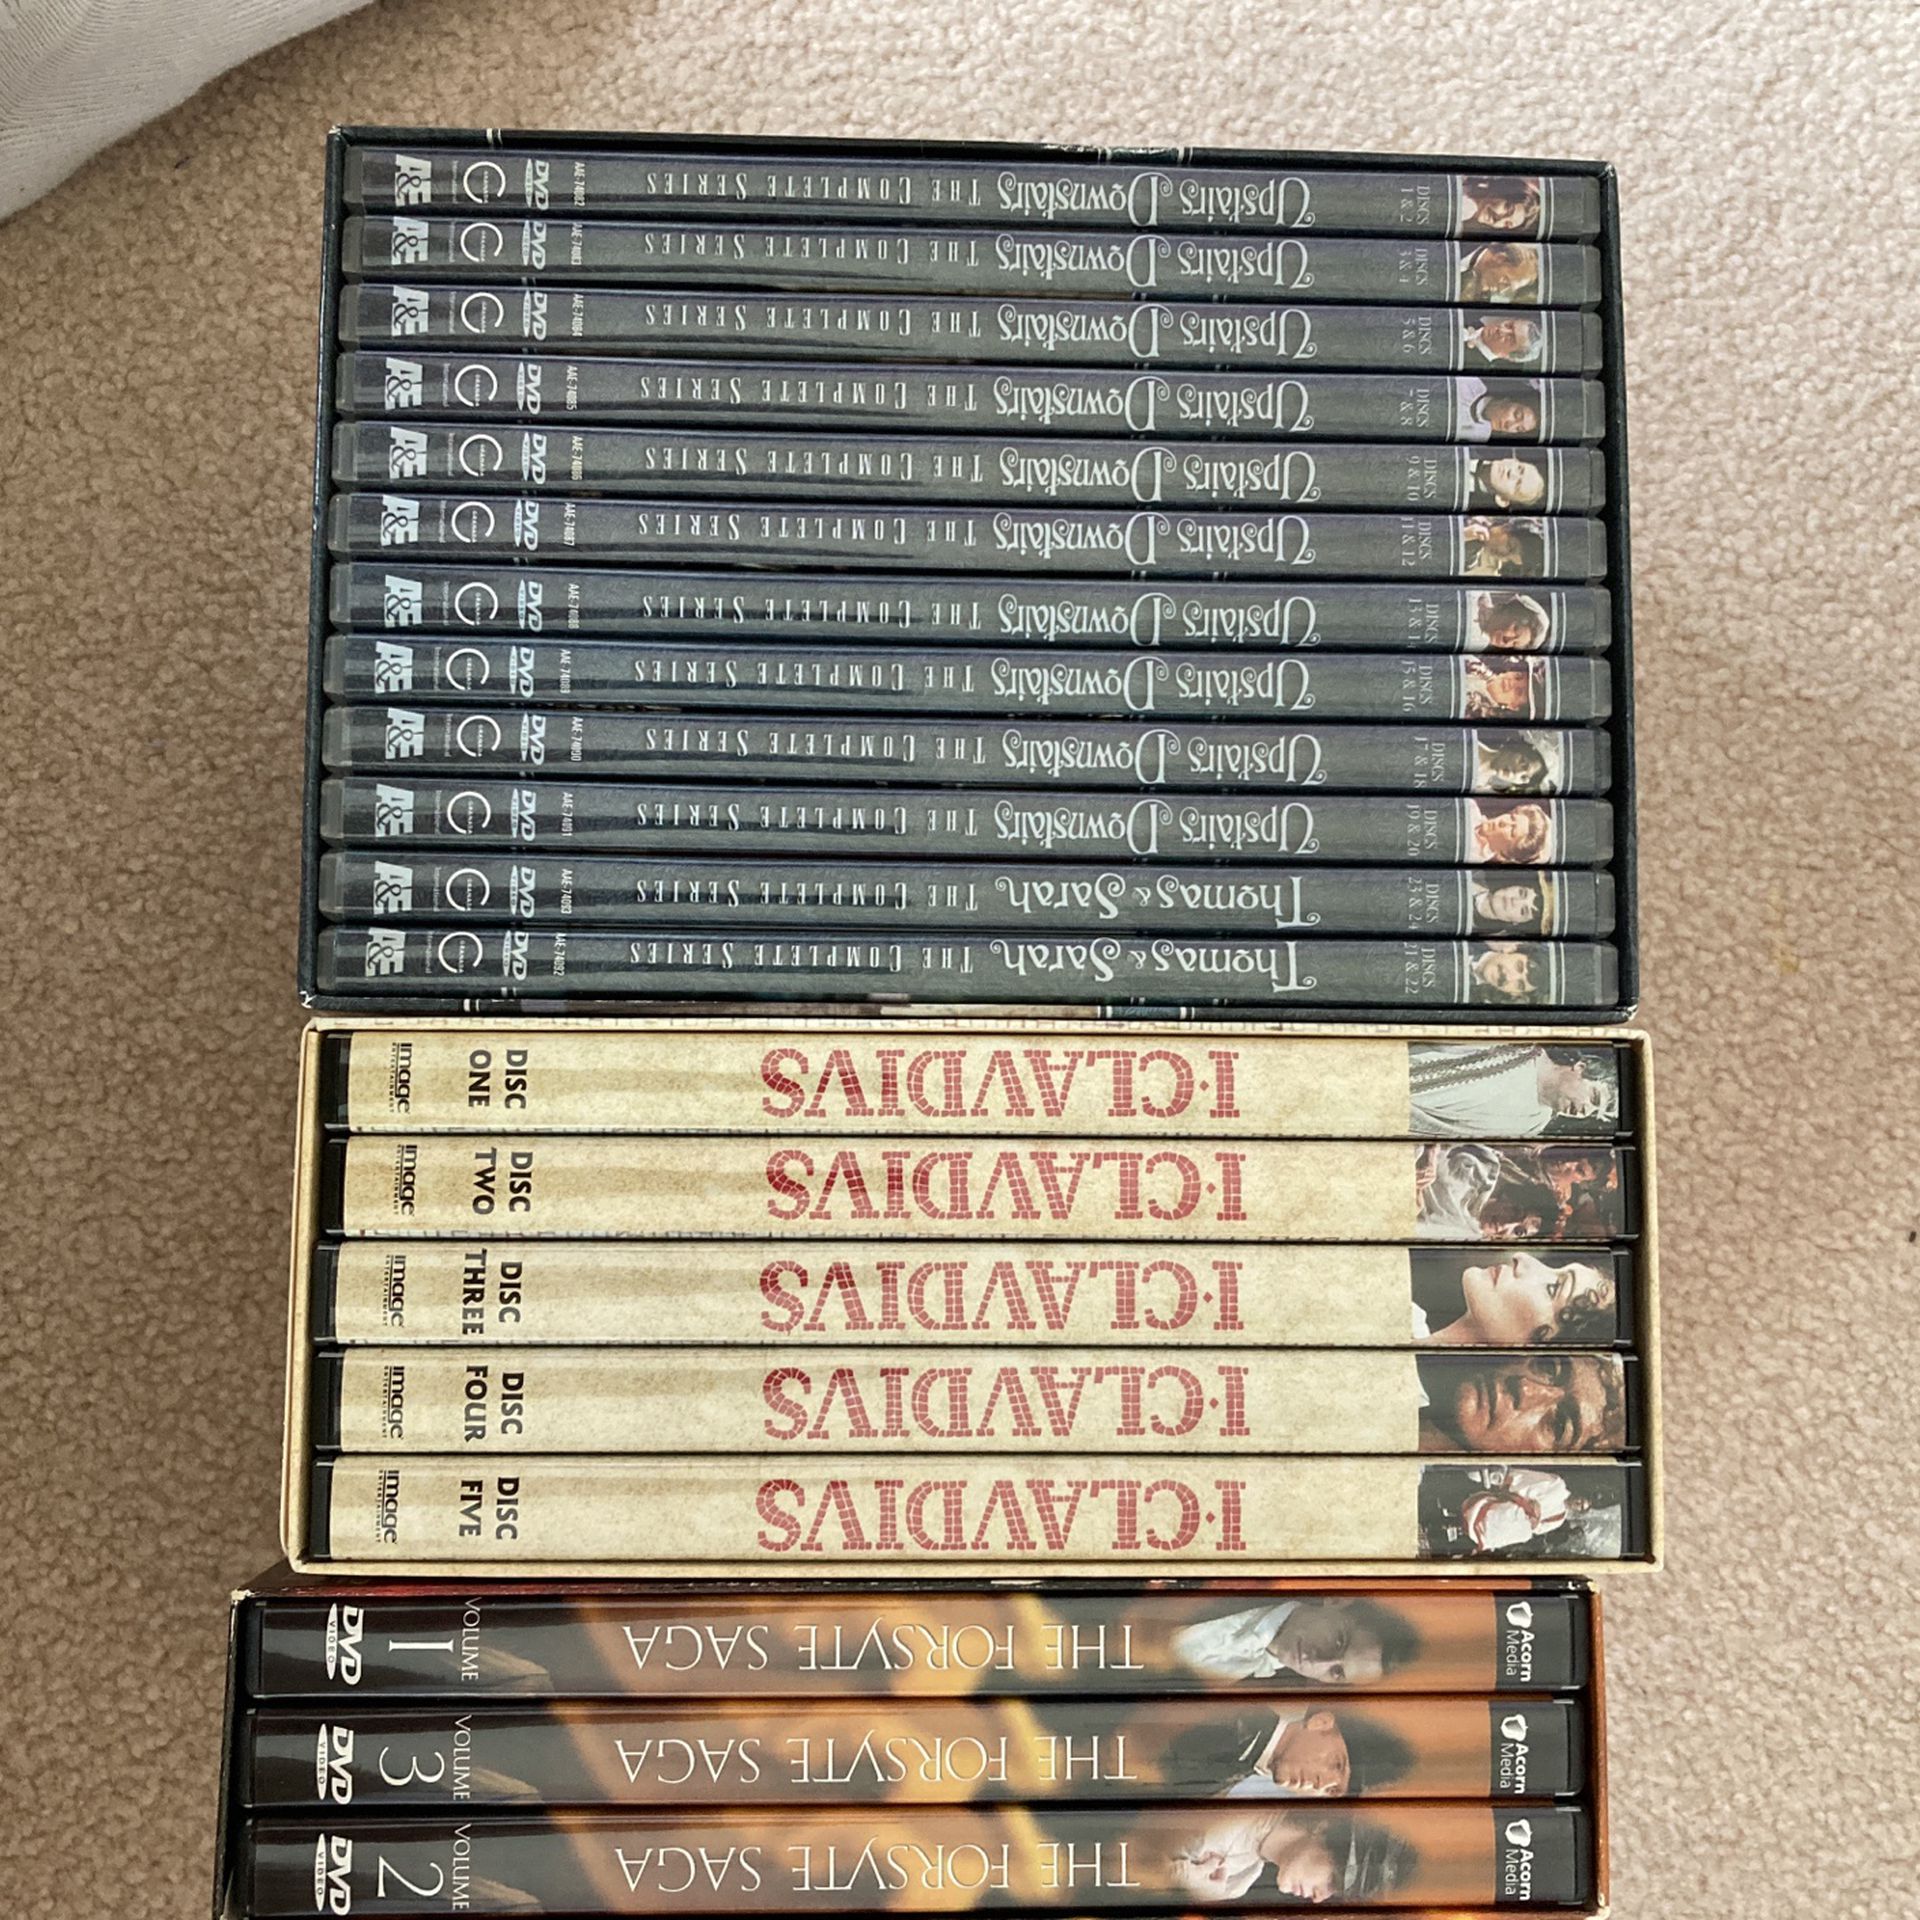 DVDs / I Claudius, Upstairs- Downstairs, The Forsyth Saga